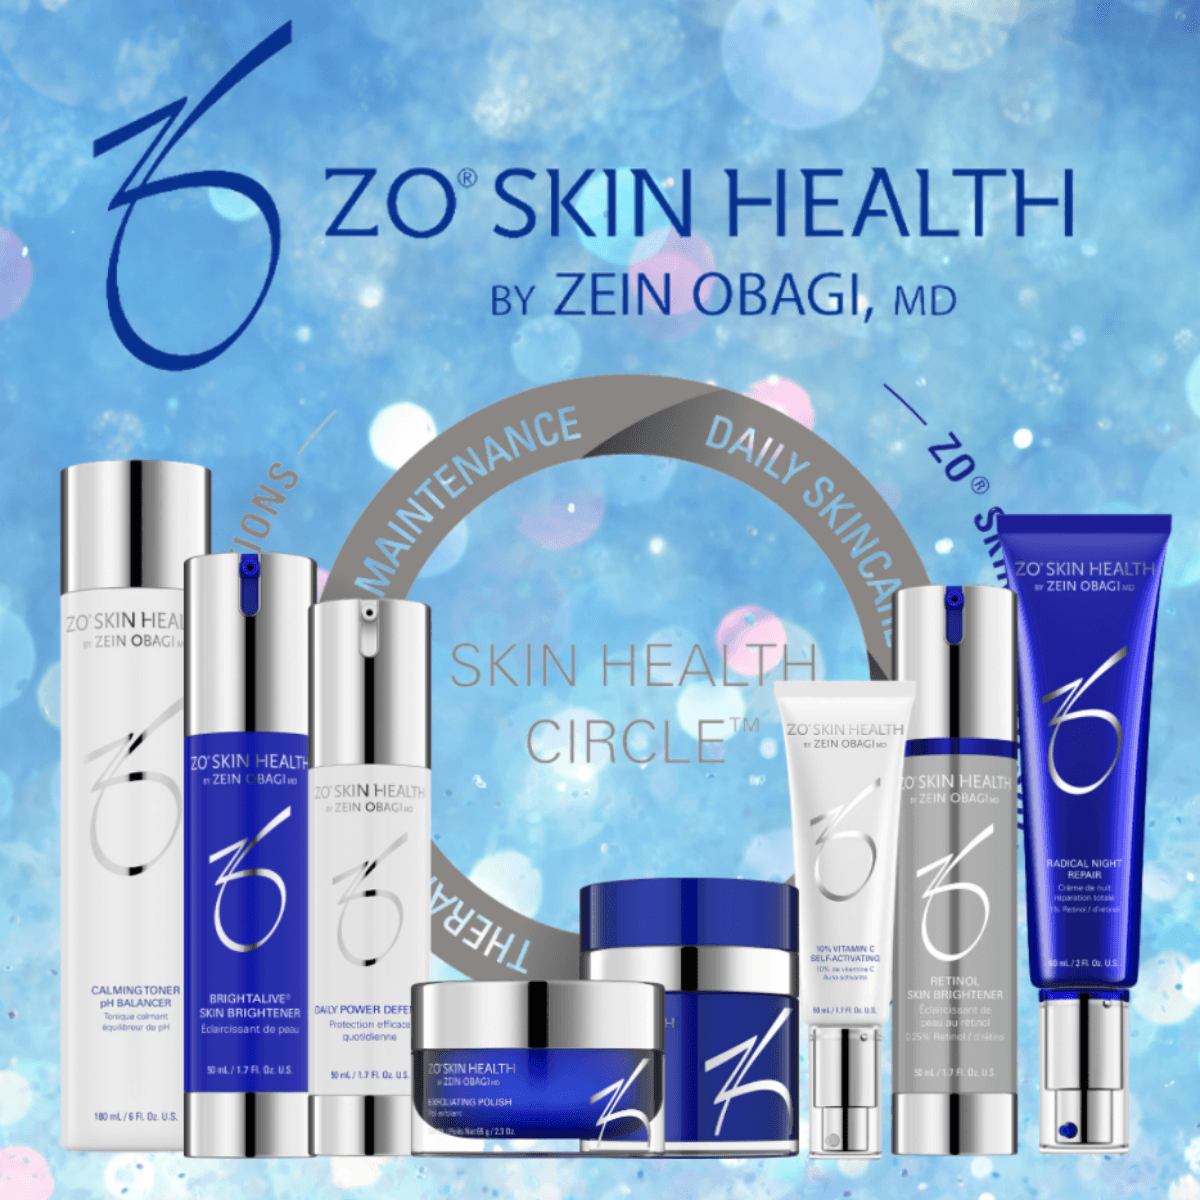 ZO SKIN HEALTH - From DR